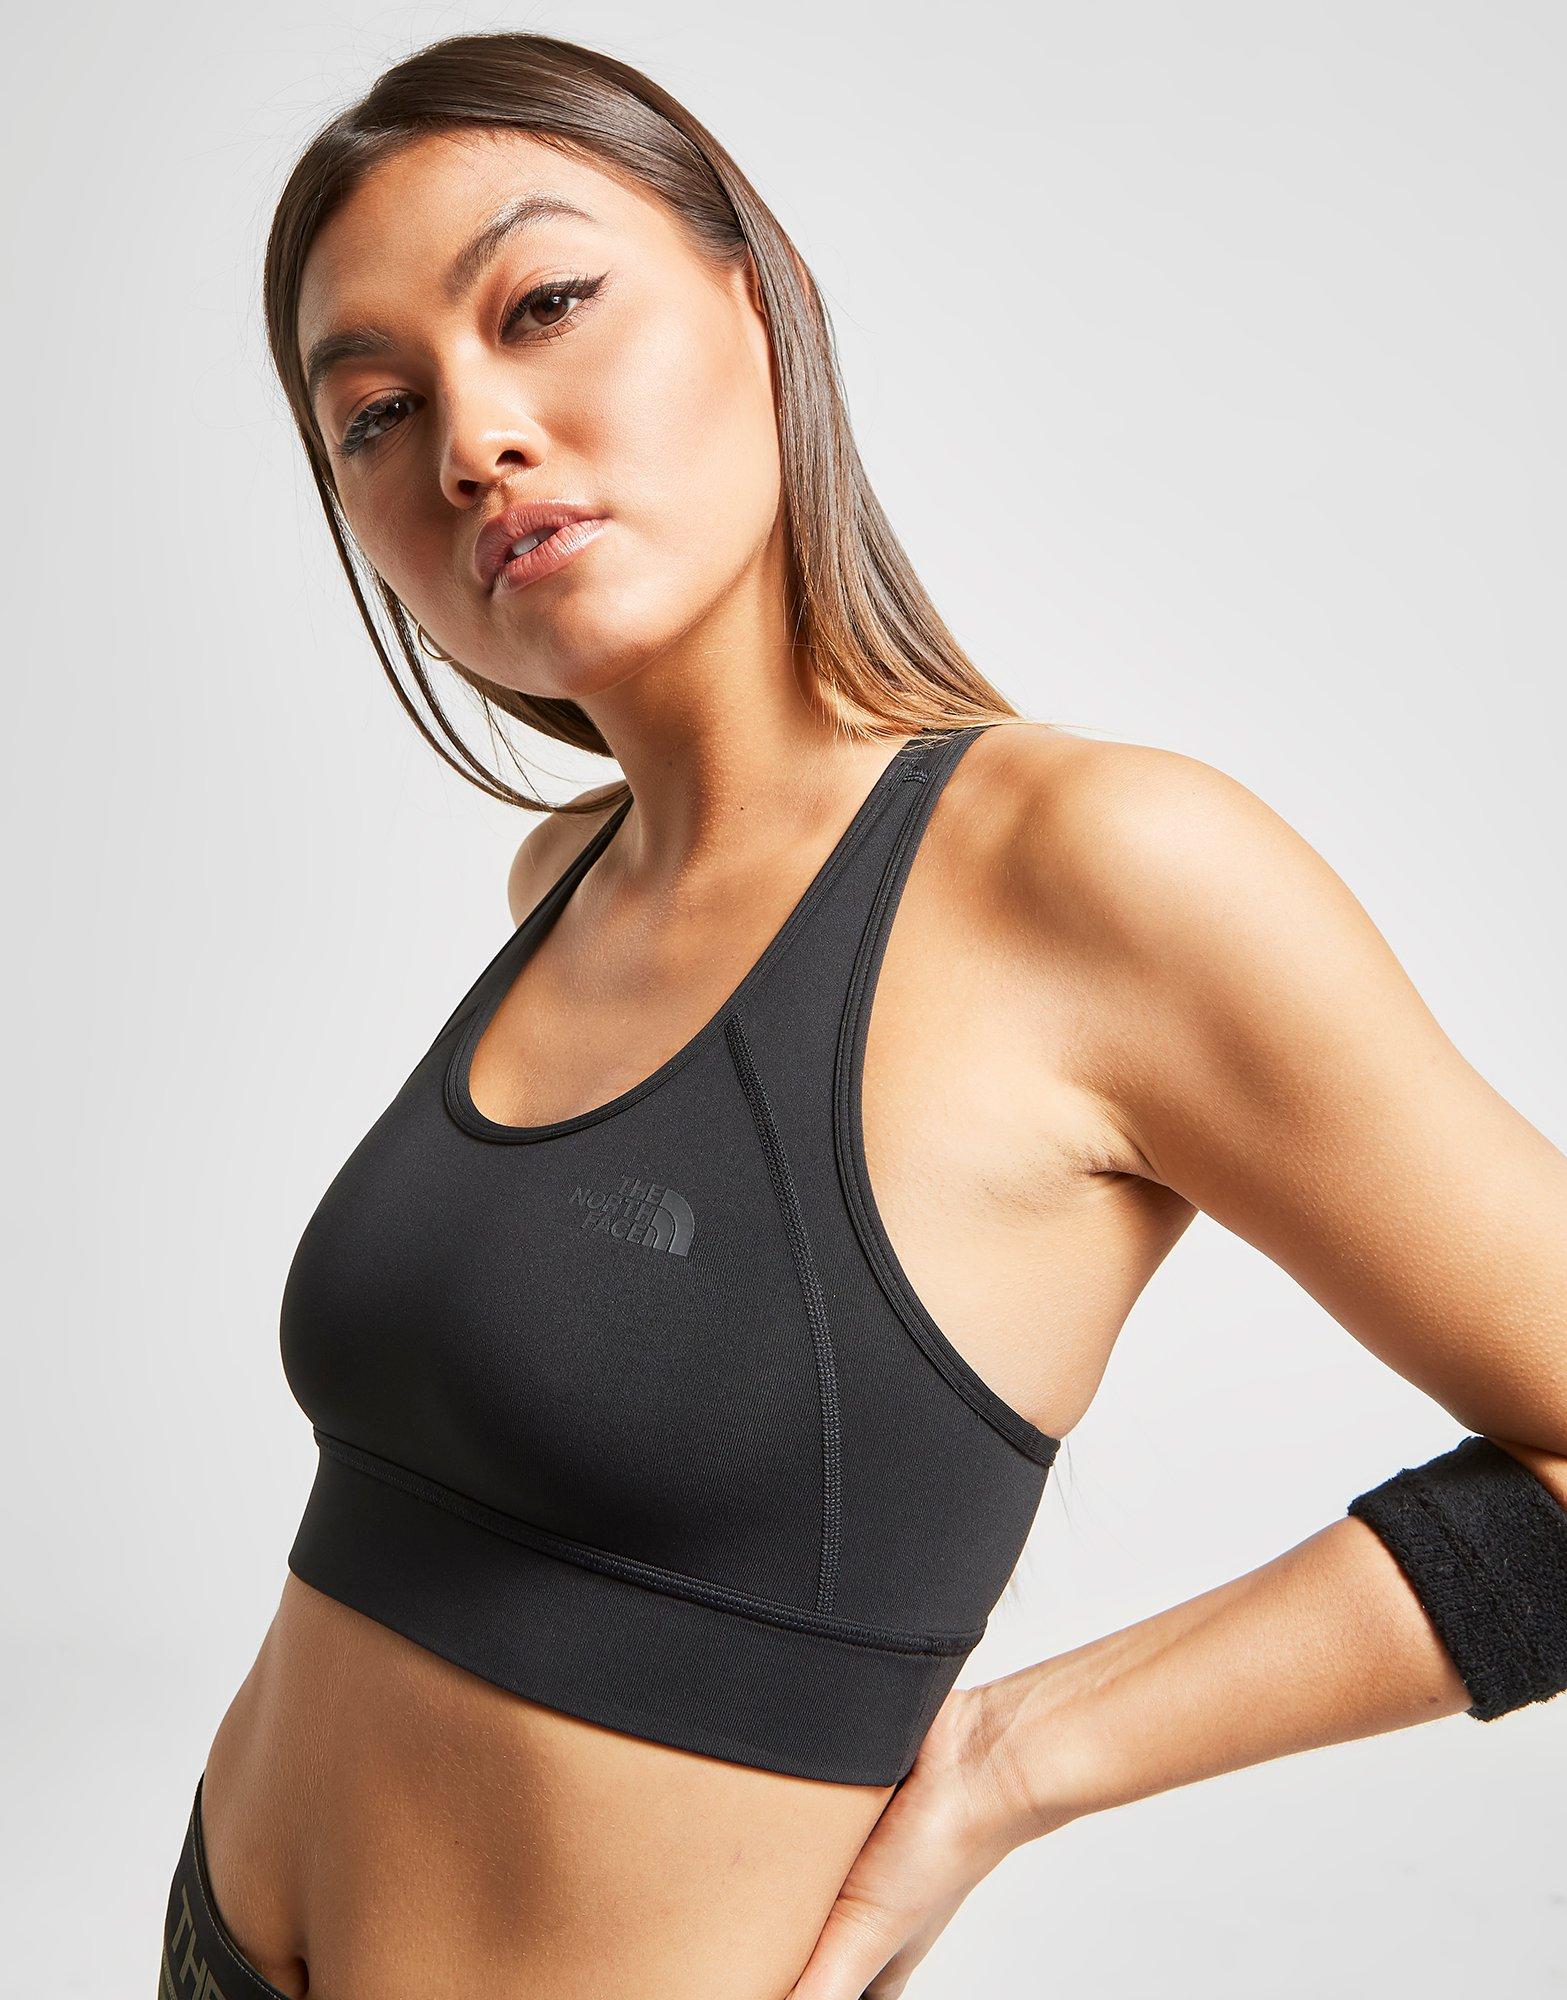 north face bounce be gone sports bra